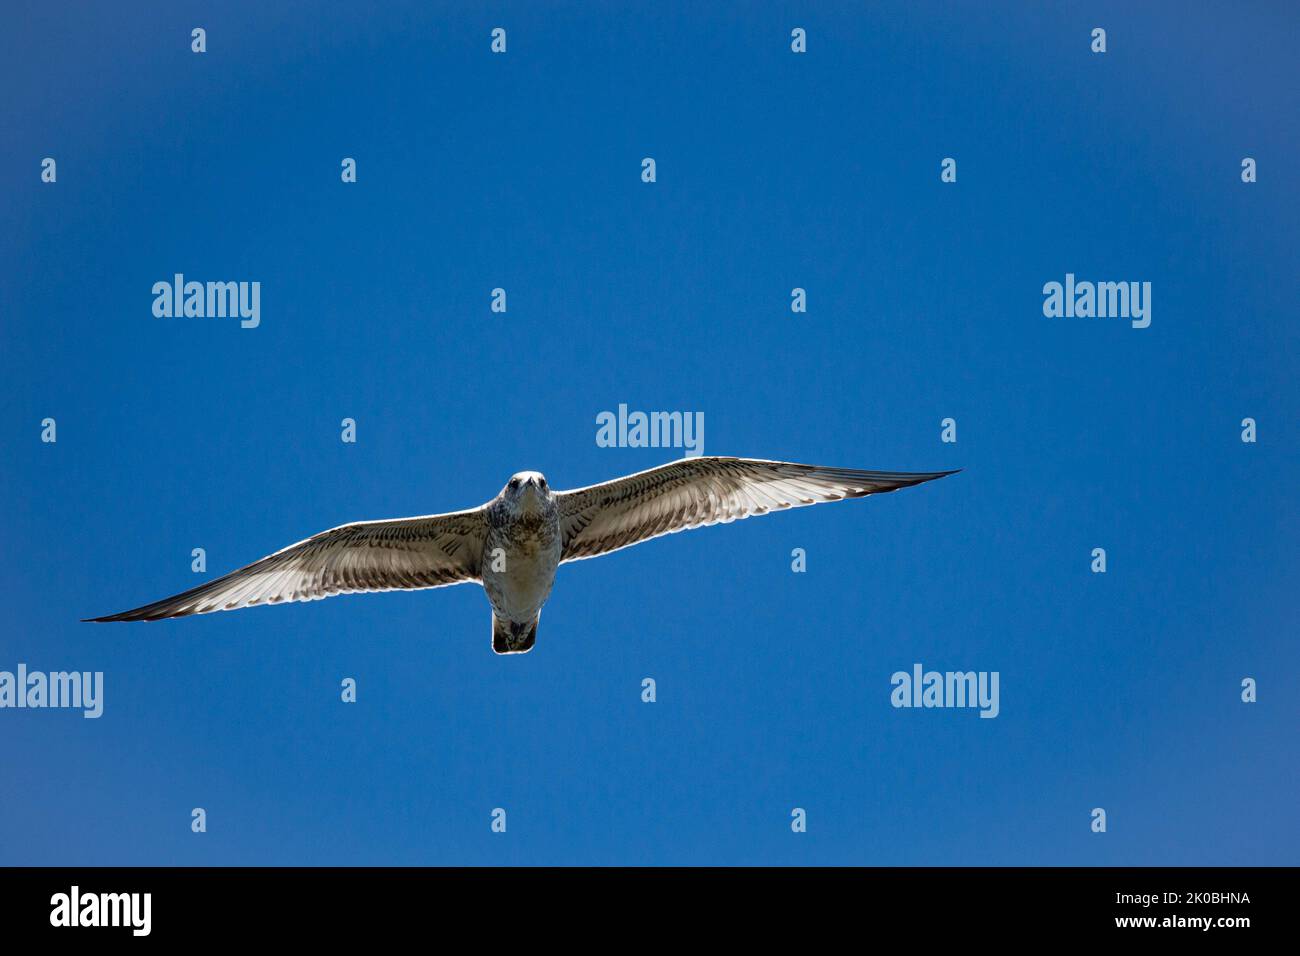 ring-billed gull (Larus delawarensis) immature flying in a blue sky with copy space, horizontal Stock Photo